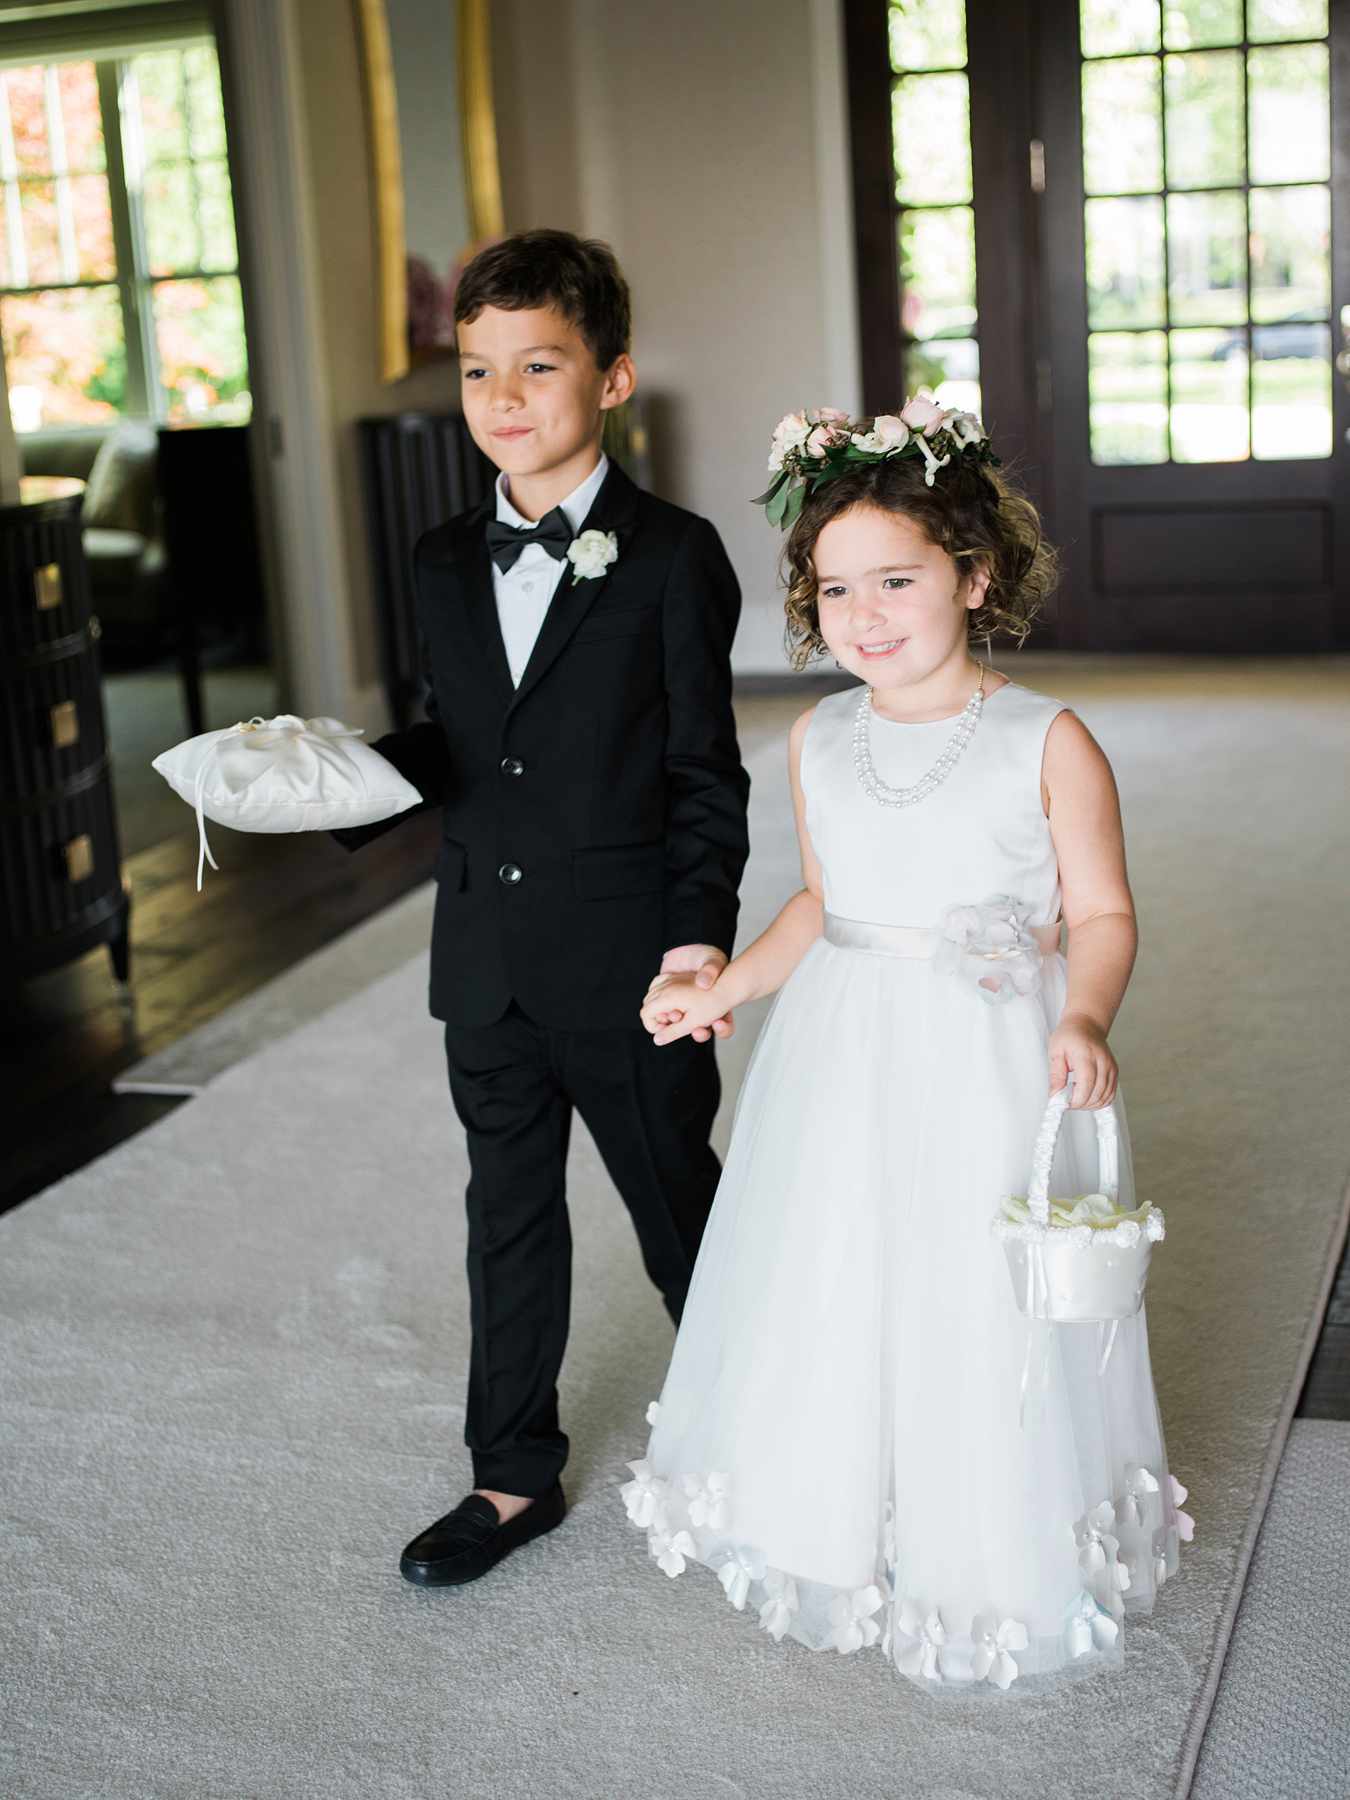 5 Tips for Coaching Your Flower Girl or ...